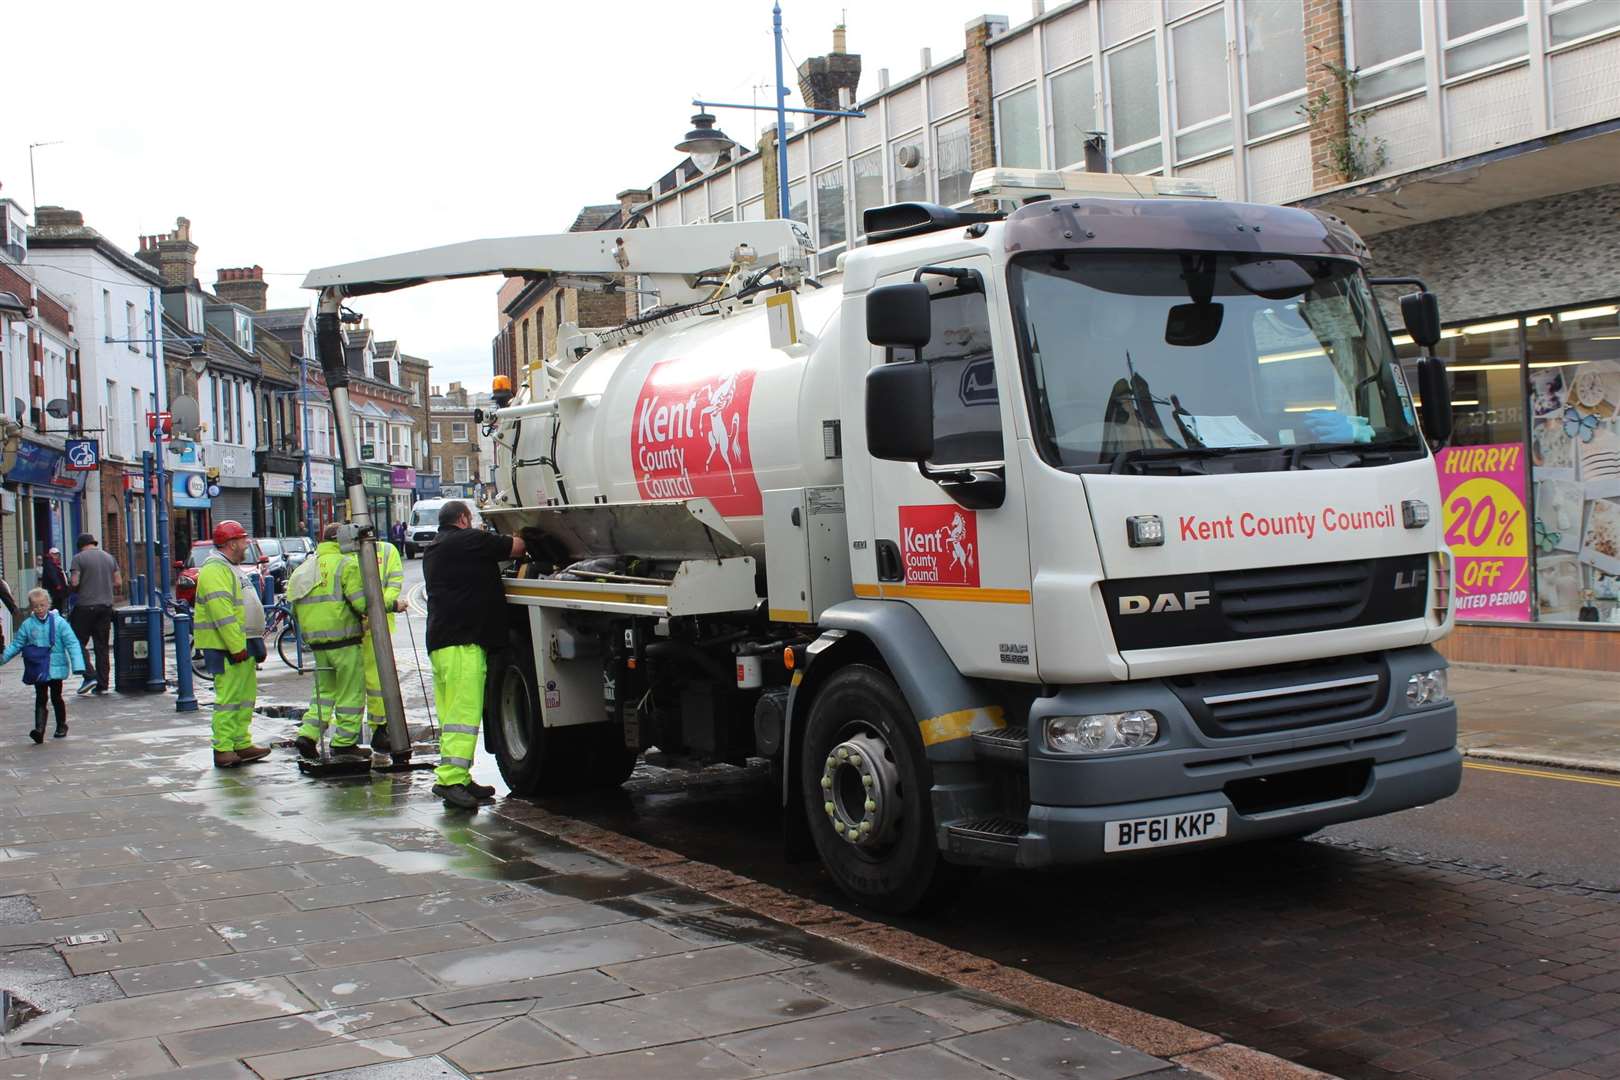 Drains being cleaned in Sheerness - April 2016 (5959987)